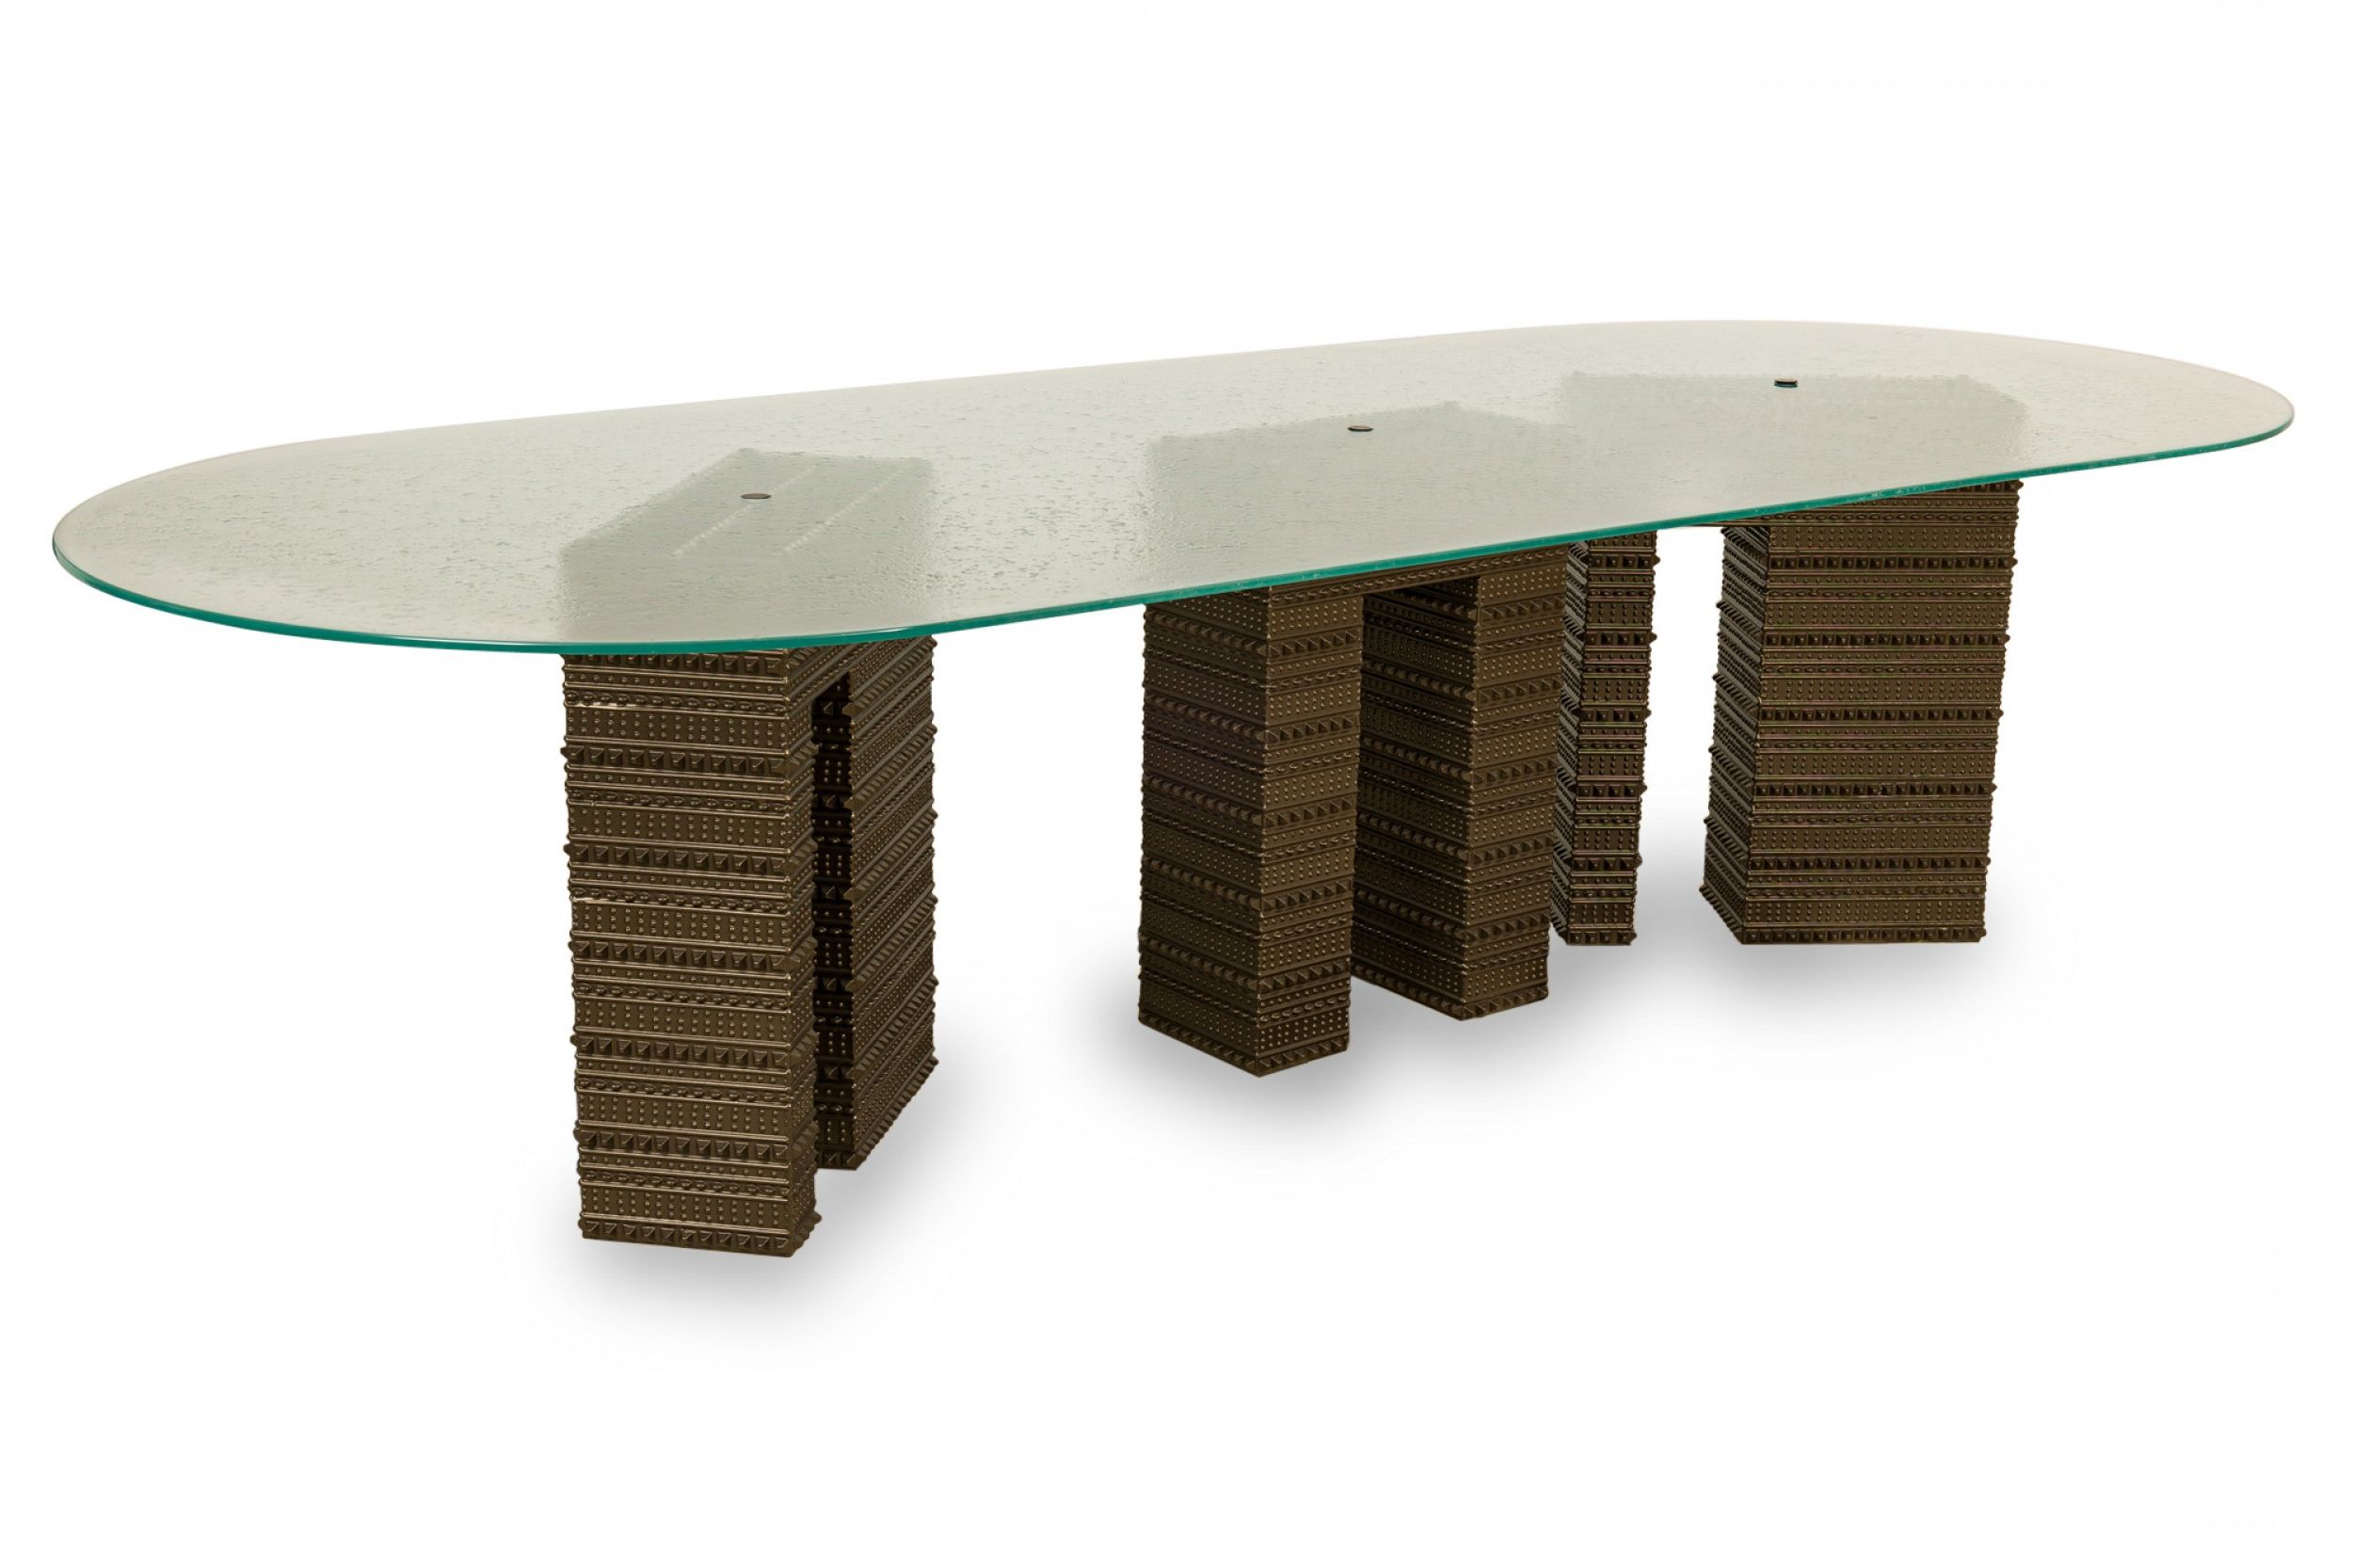 Modern Geometric Outdoor Tables In 2019 Contemporary Abstract Geometric Three Metal Pedestal Seeded Glass Top  Dining Conference Table (View 15 of 15)